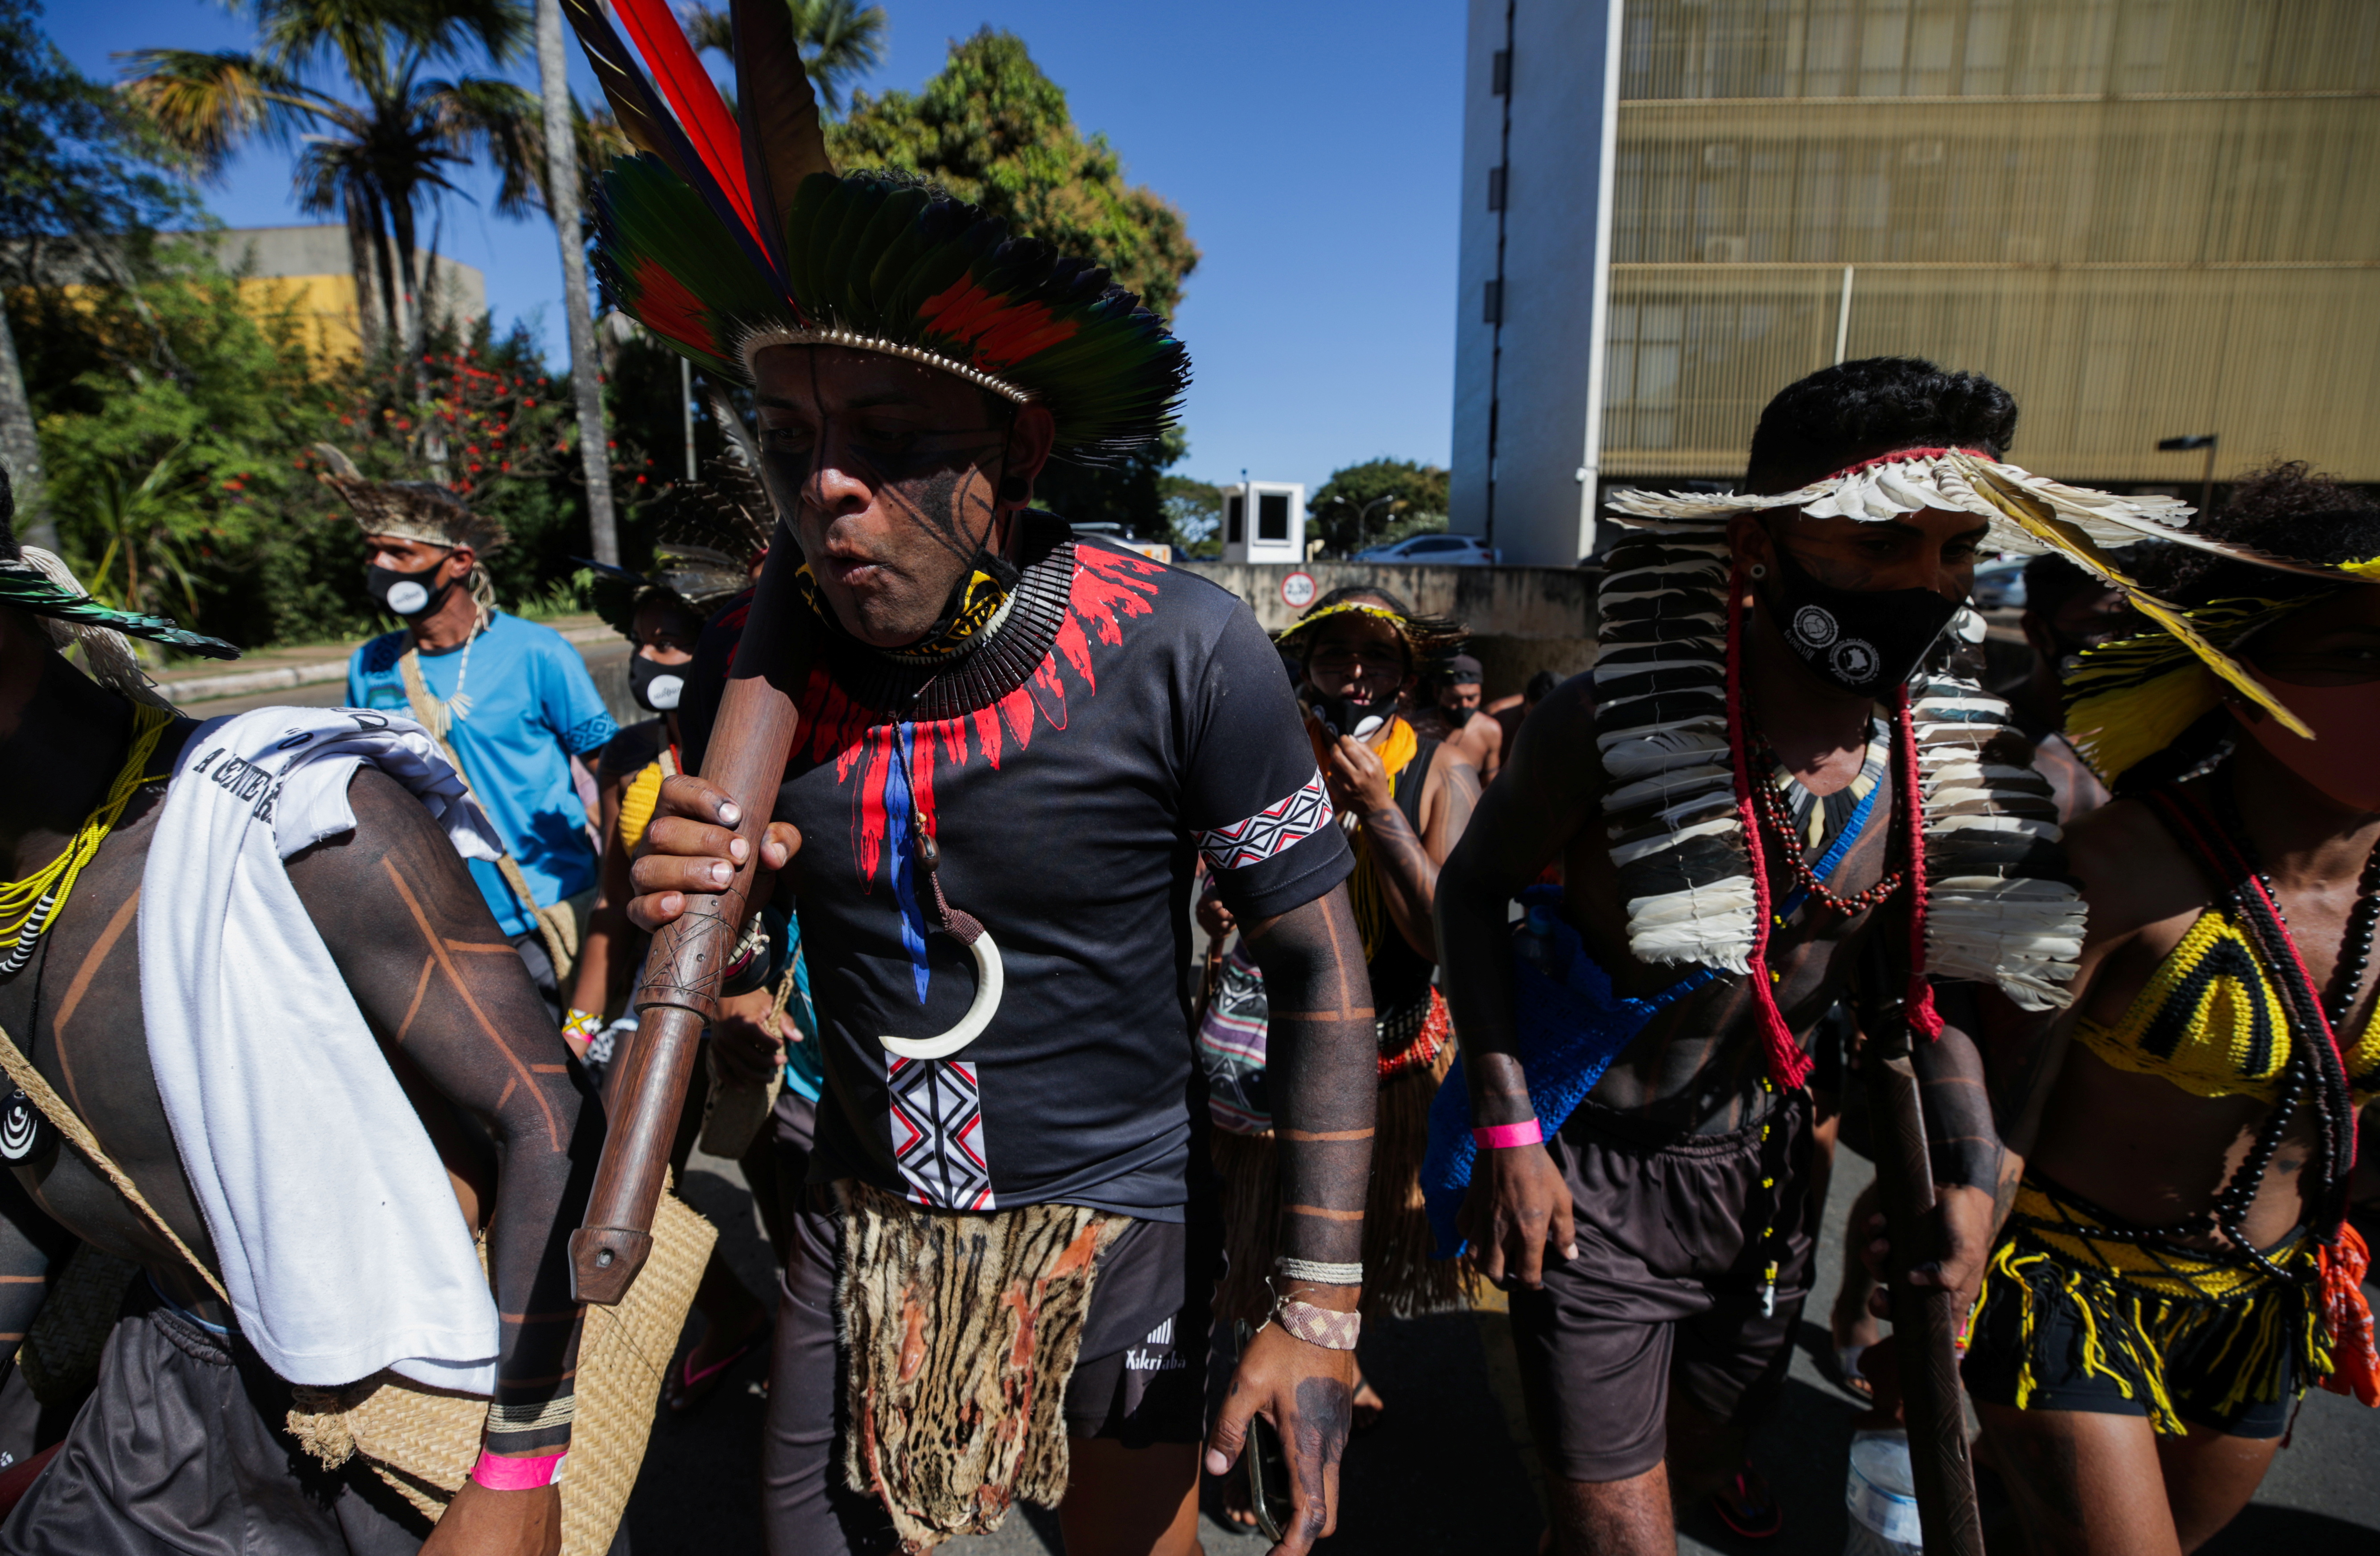 Indigenous Brazilians from different ethnic groups take part in a protest against land demarcation and President Jair Bolsonaro's government, in Brasilia